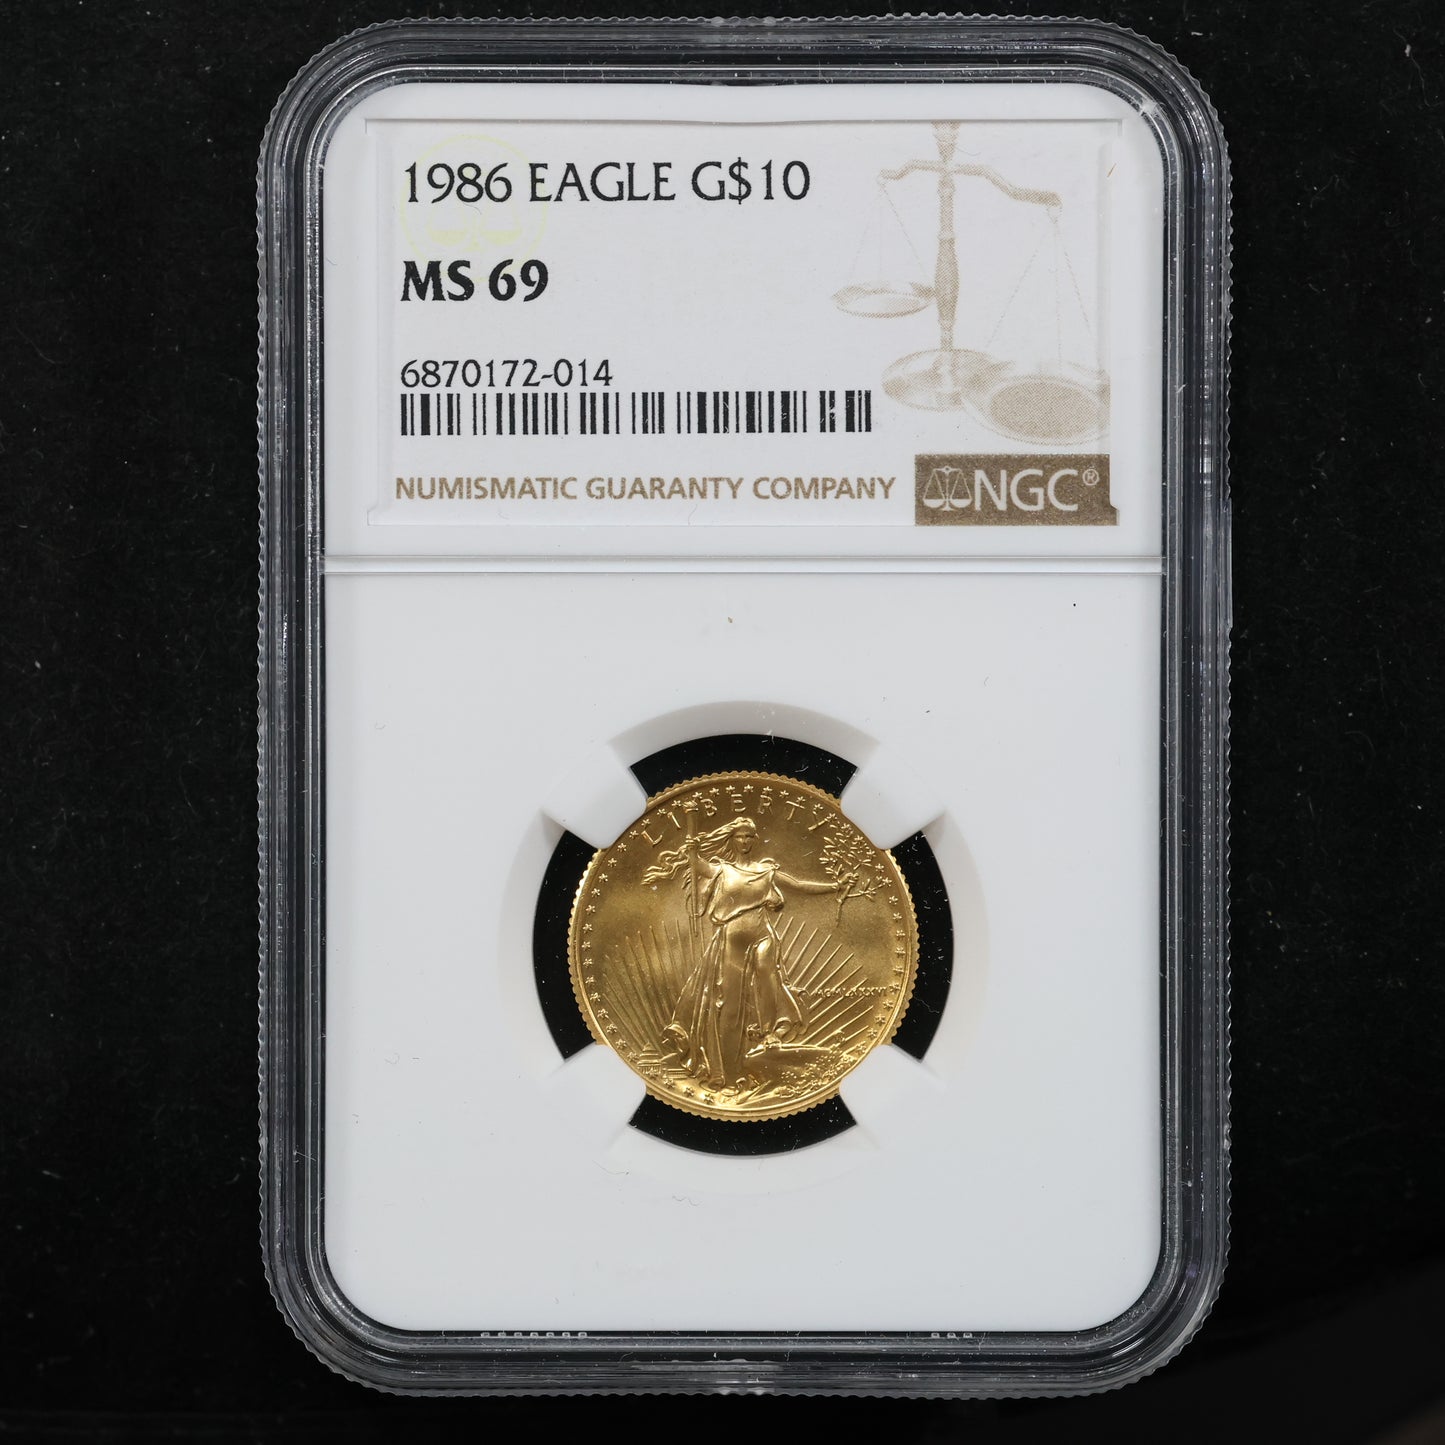 1986 1/4 oz Gold American Eagle 10$ Bullion Gold Coin - NGC MS 69